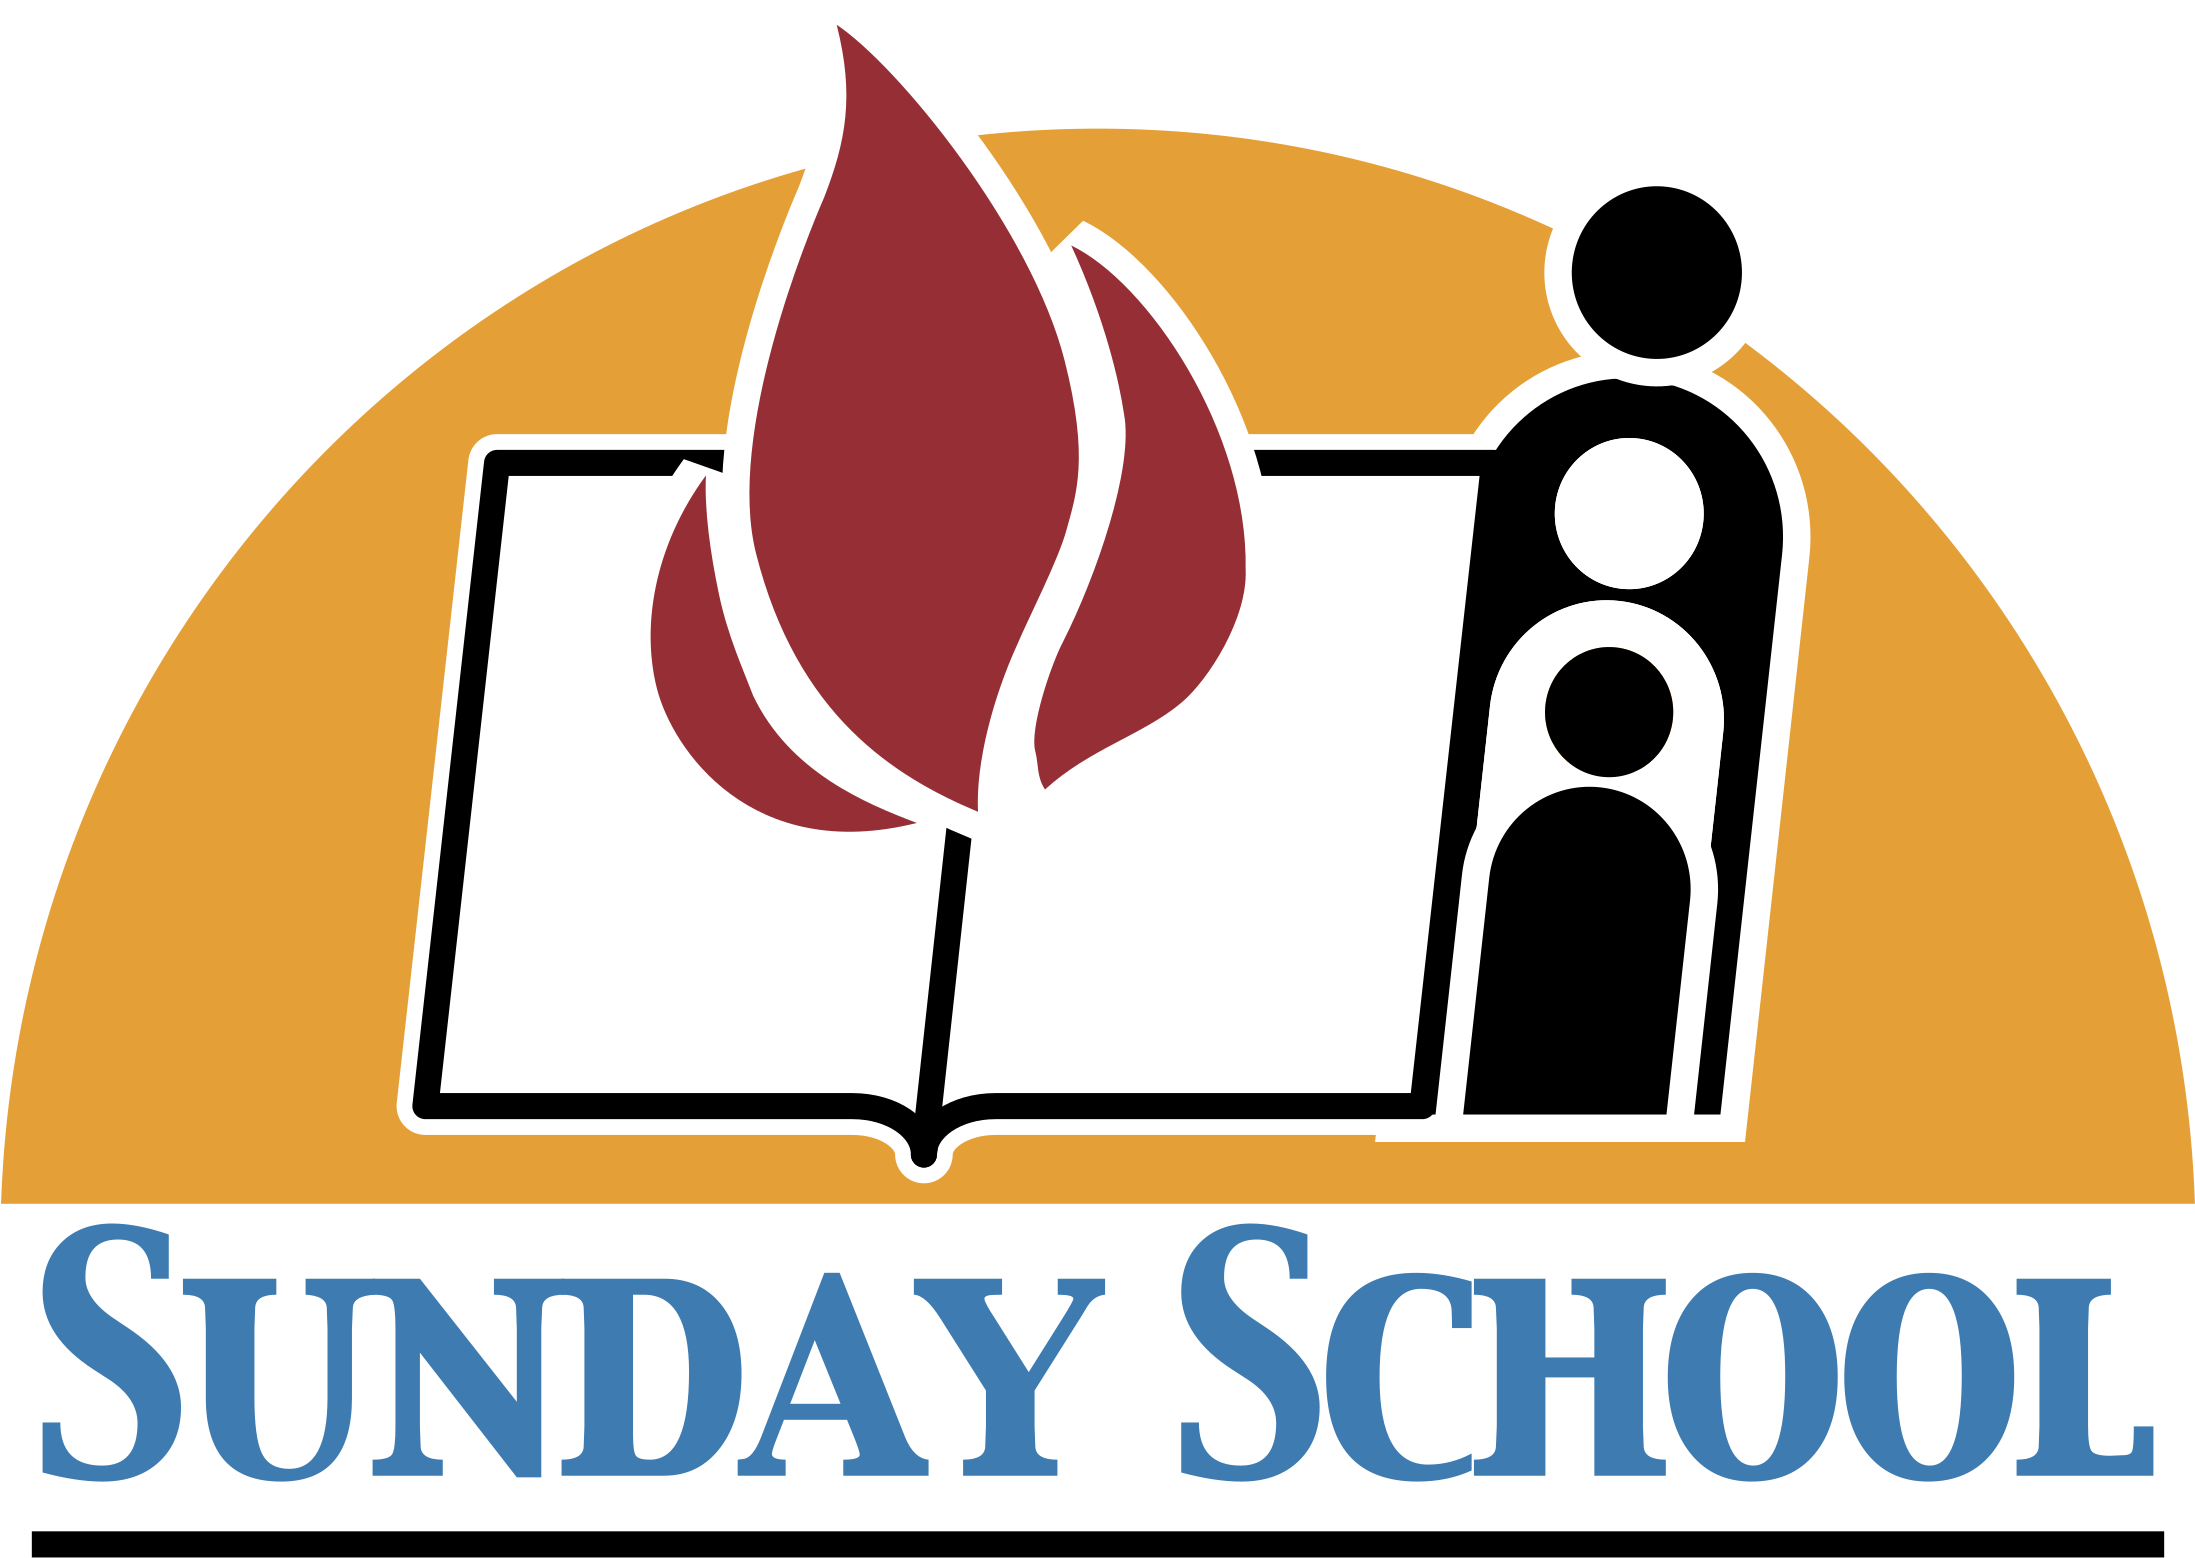 Download Sunday School Logo Png Transparent - Sunday School Logos PNG Image  with No Background 